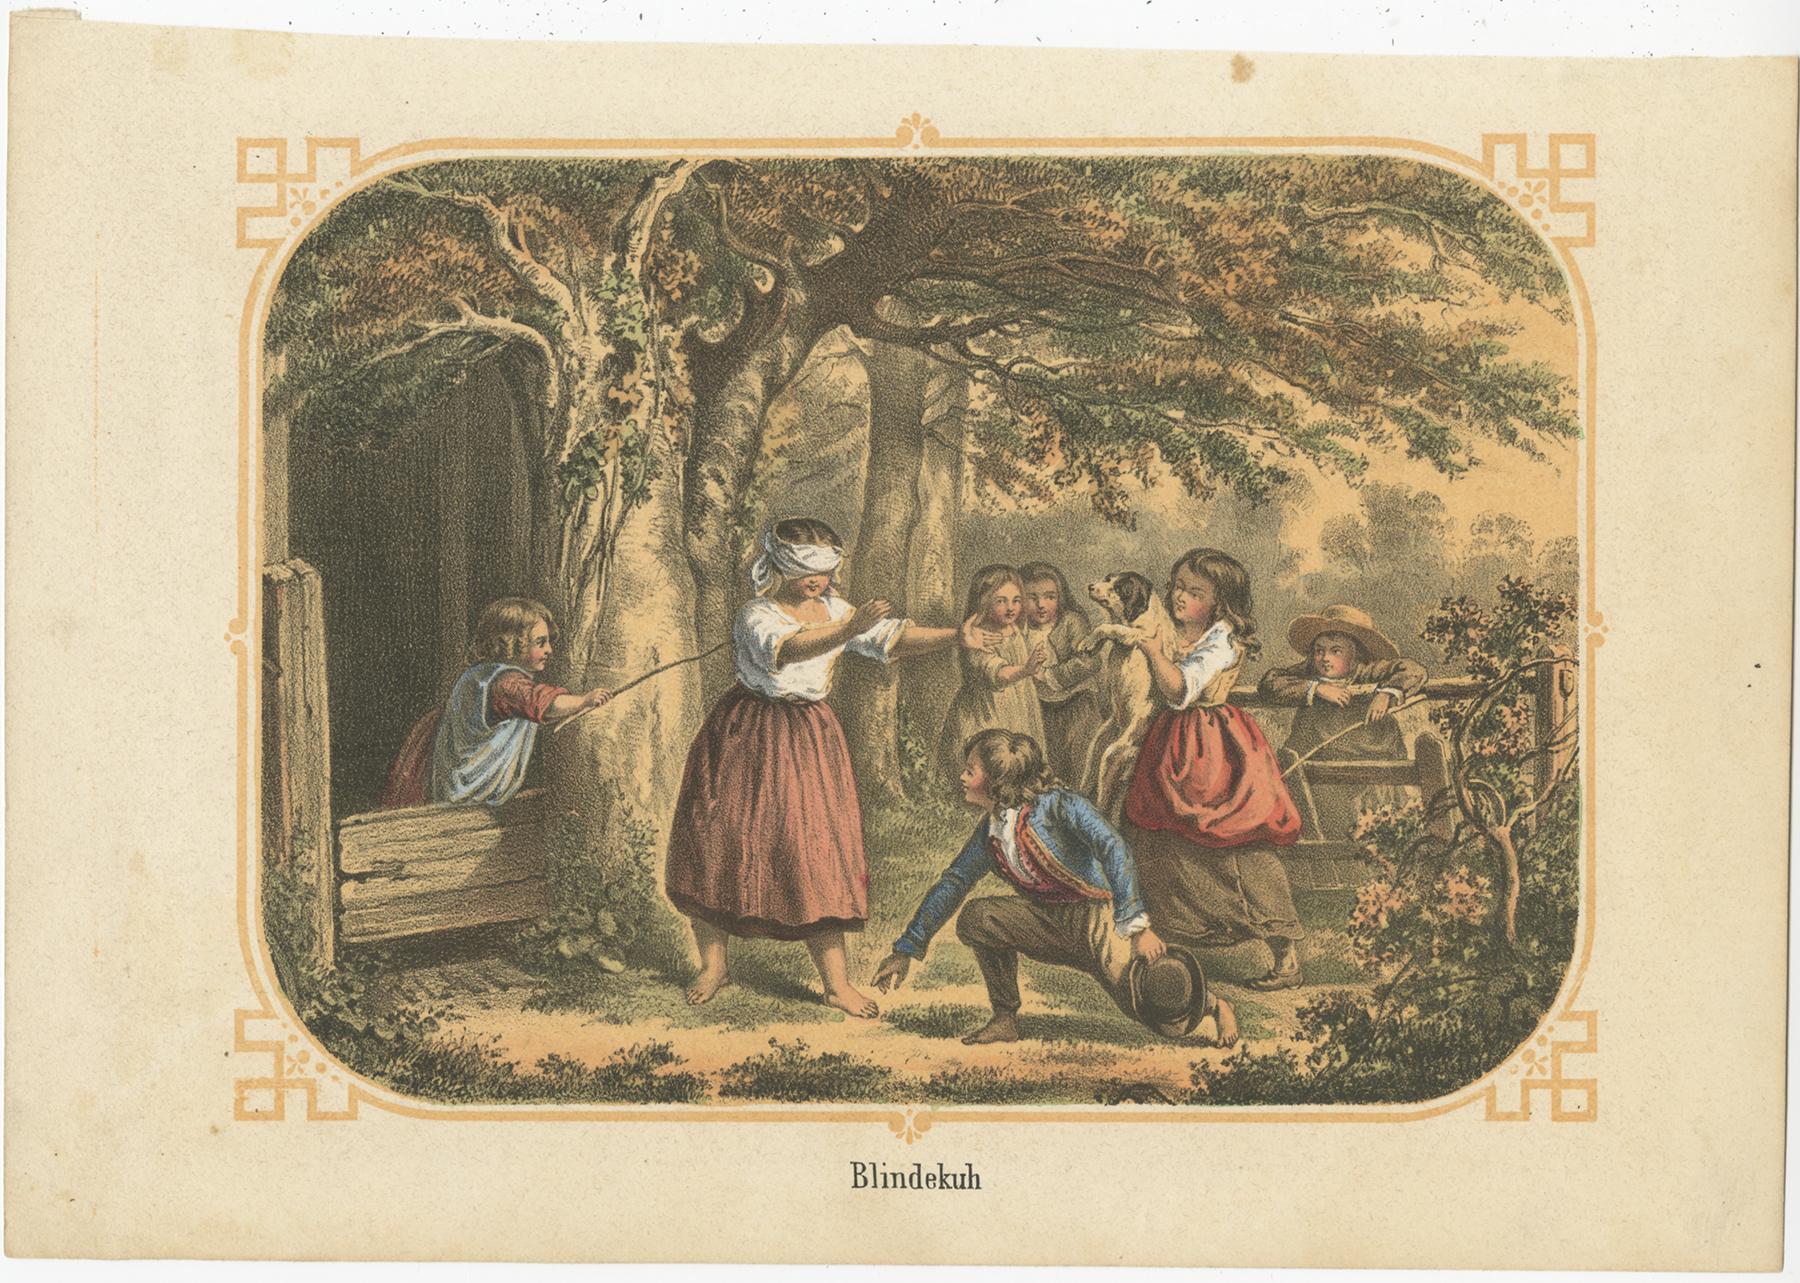 Antique print titled 'Blindekuh'. Old lithograph of a group of children playing a blindfold game. Source unknown, to be determined. Published circa 1860.